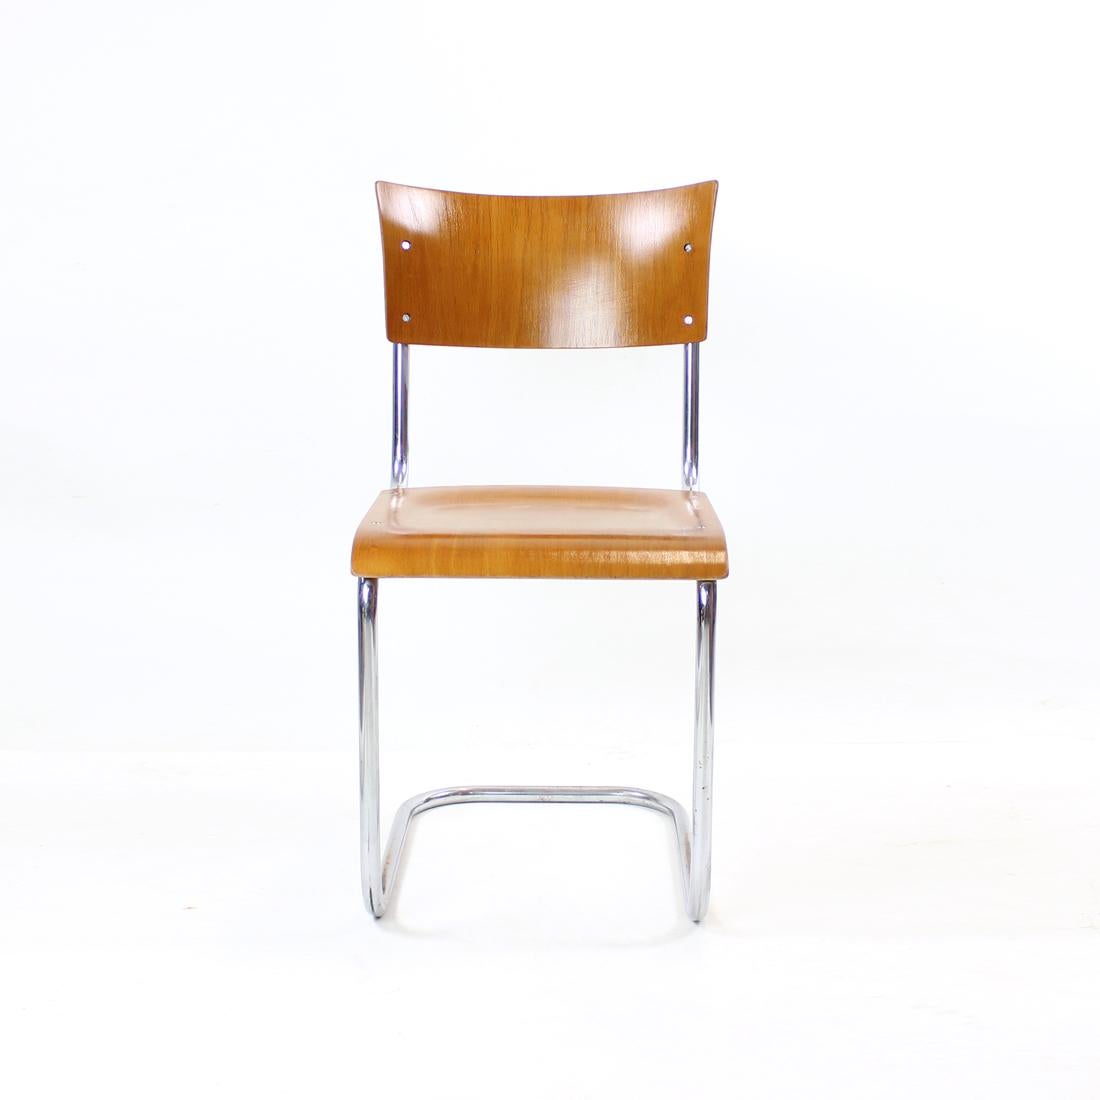 Iconic chair of the 20th century. Produced in midcentury era out of bent chrome pipe construction. Molded plywood seat and backrest. Original design by Mart Stam for the Thonet company. In Czechoslovakia the chairs were manufactured by Kovona